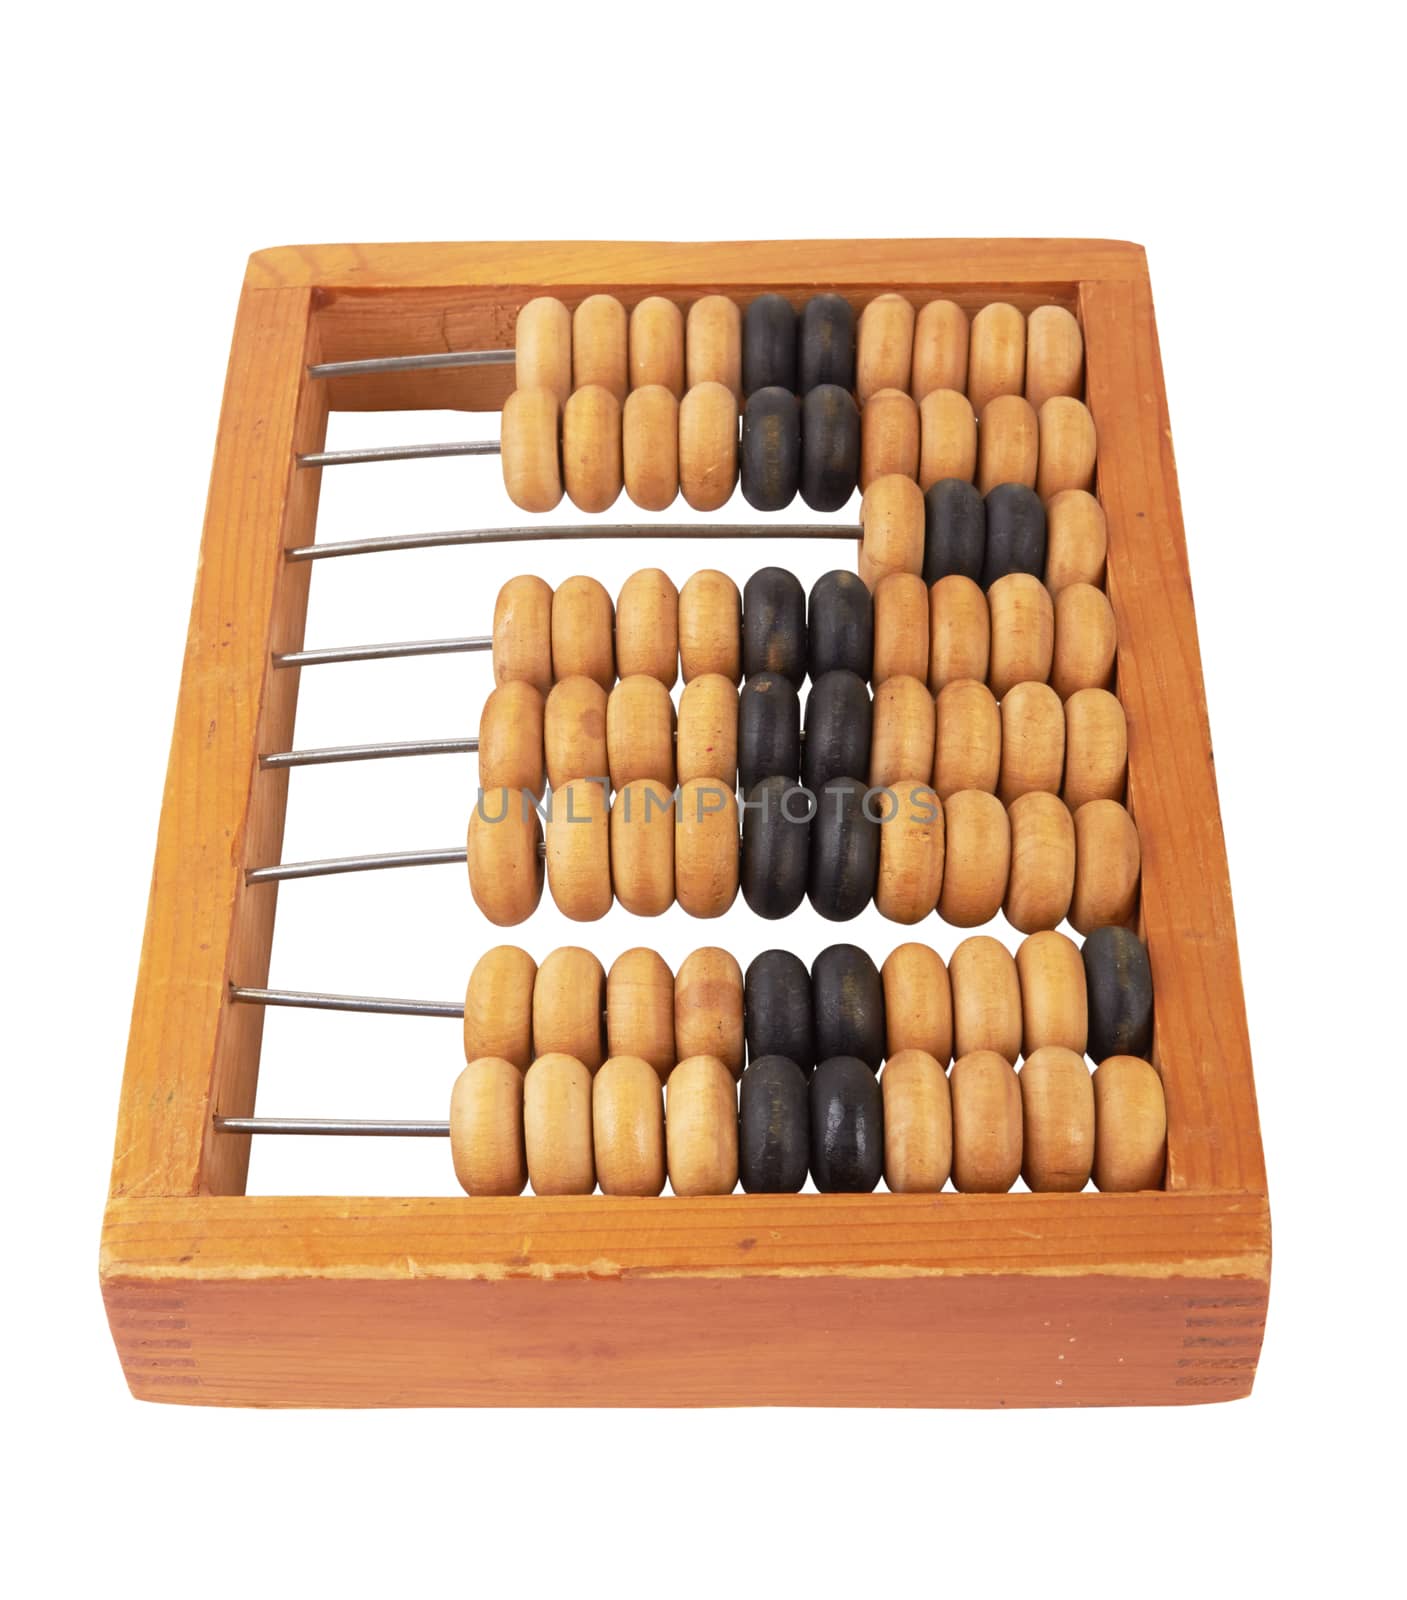 antique wooden abacus isolated on white background